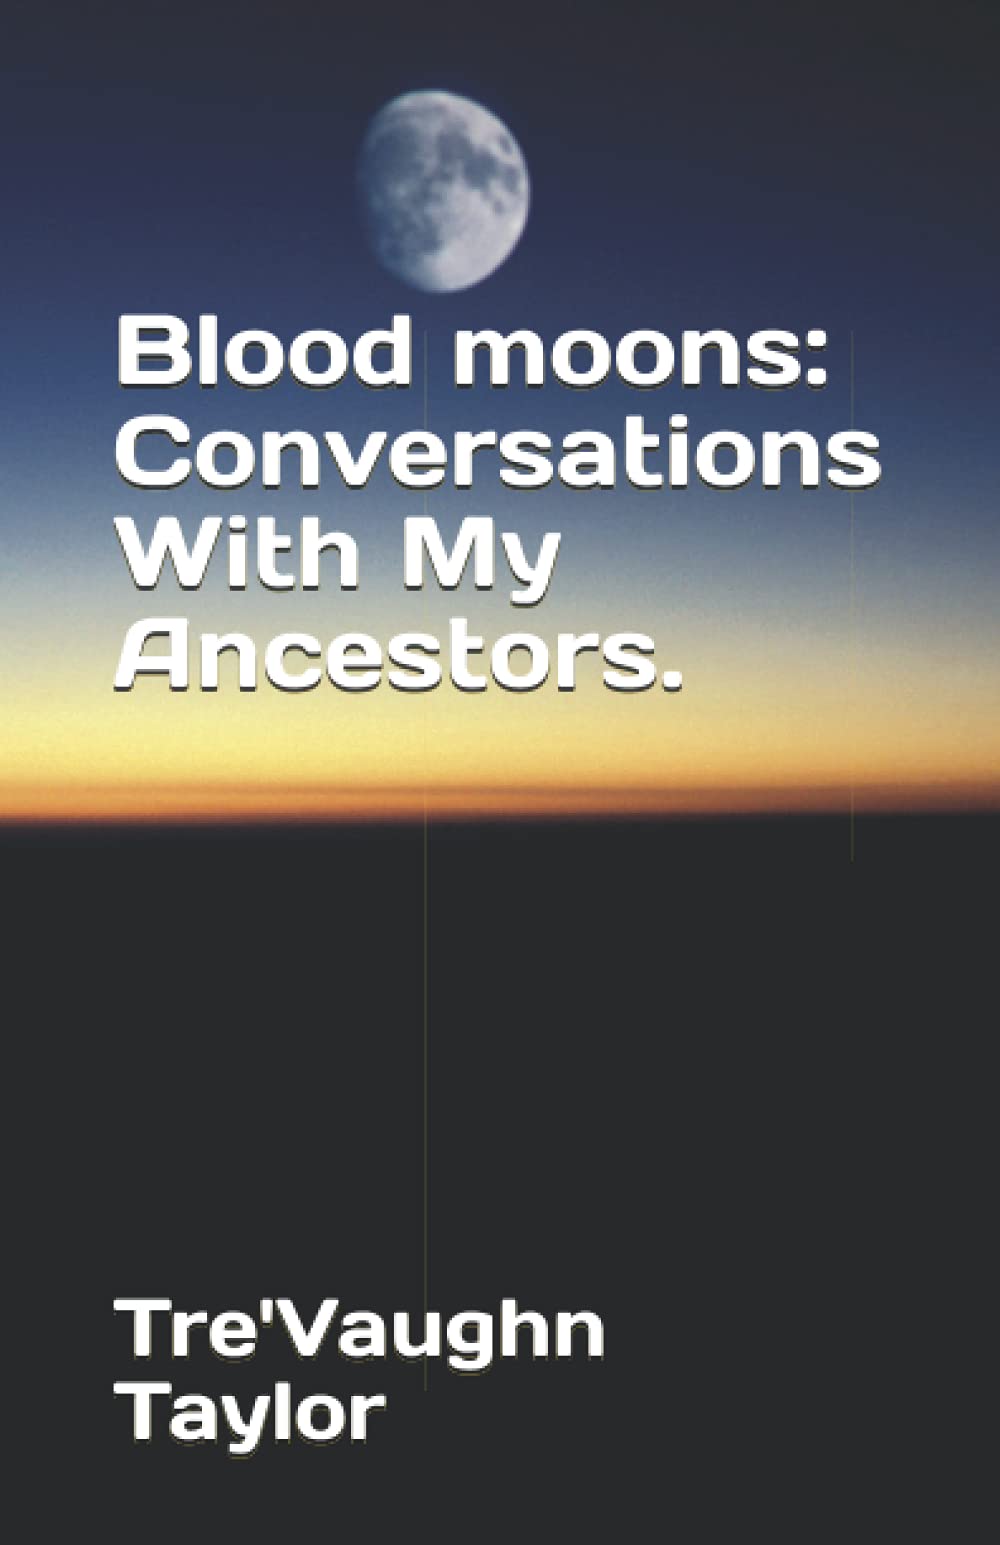 Image of ( NEW ) |  Blood moons: Conversations With My Ancestors.